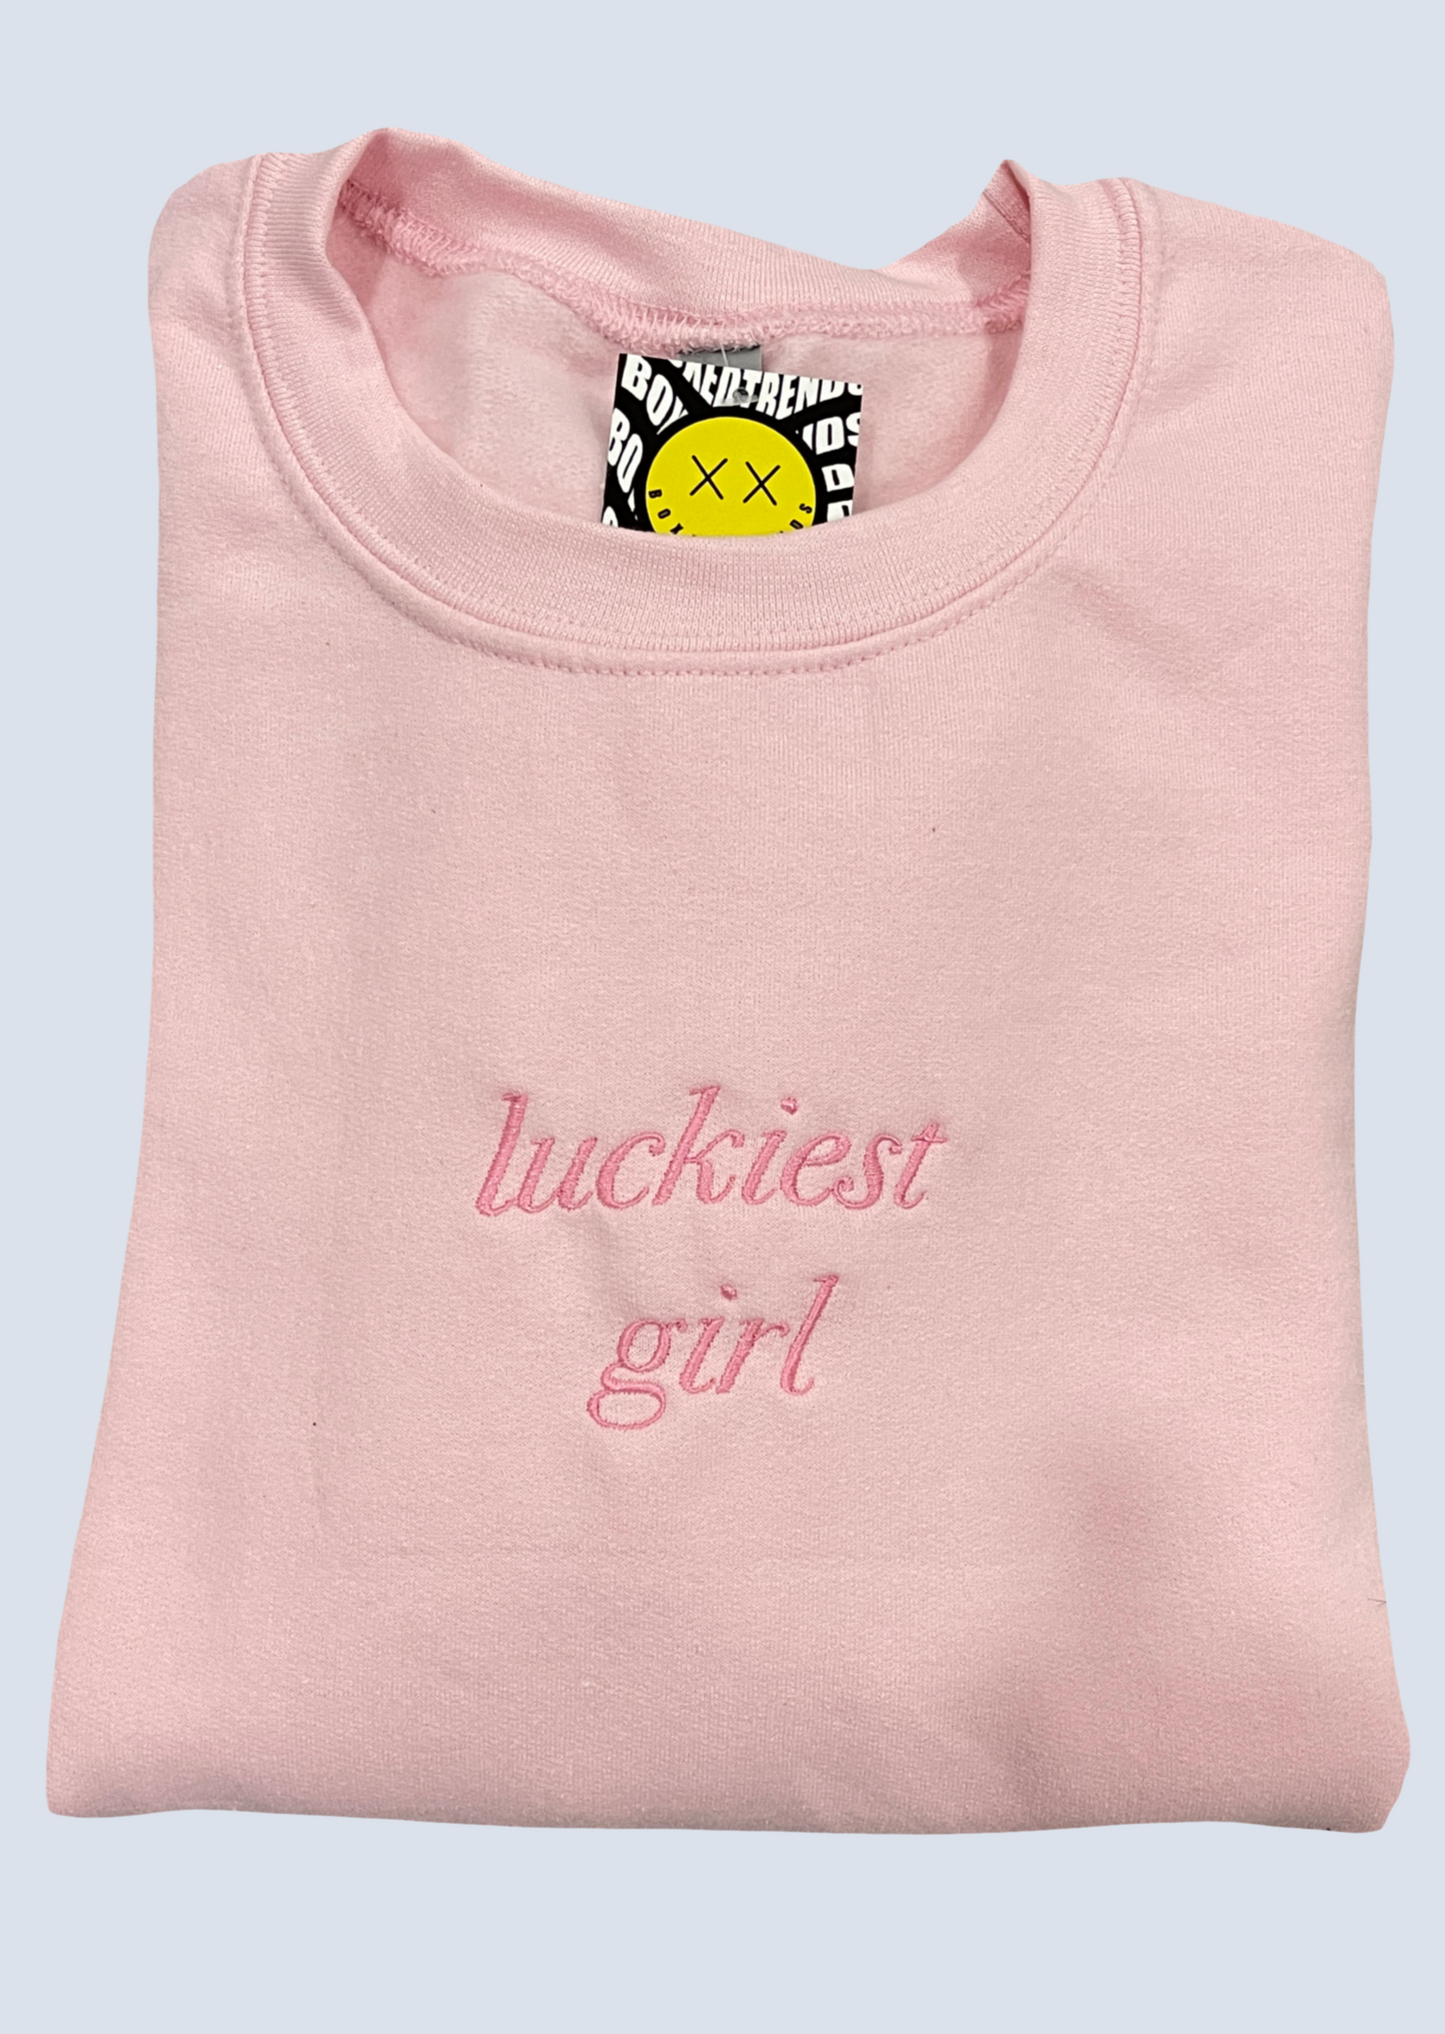 Luckiest Girl Embroidery